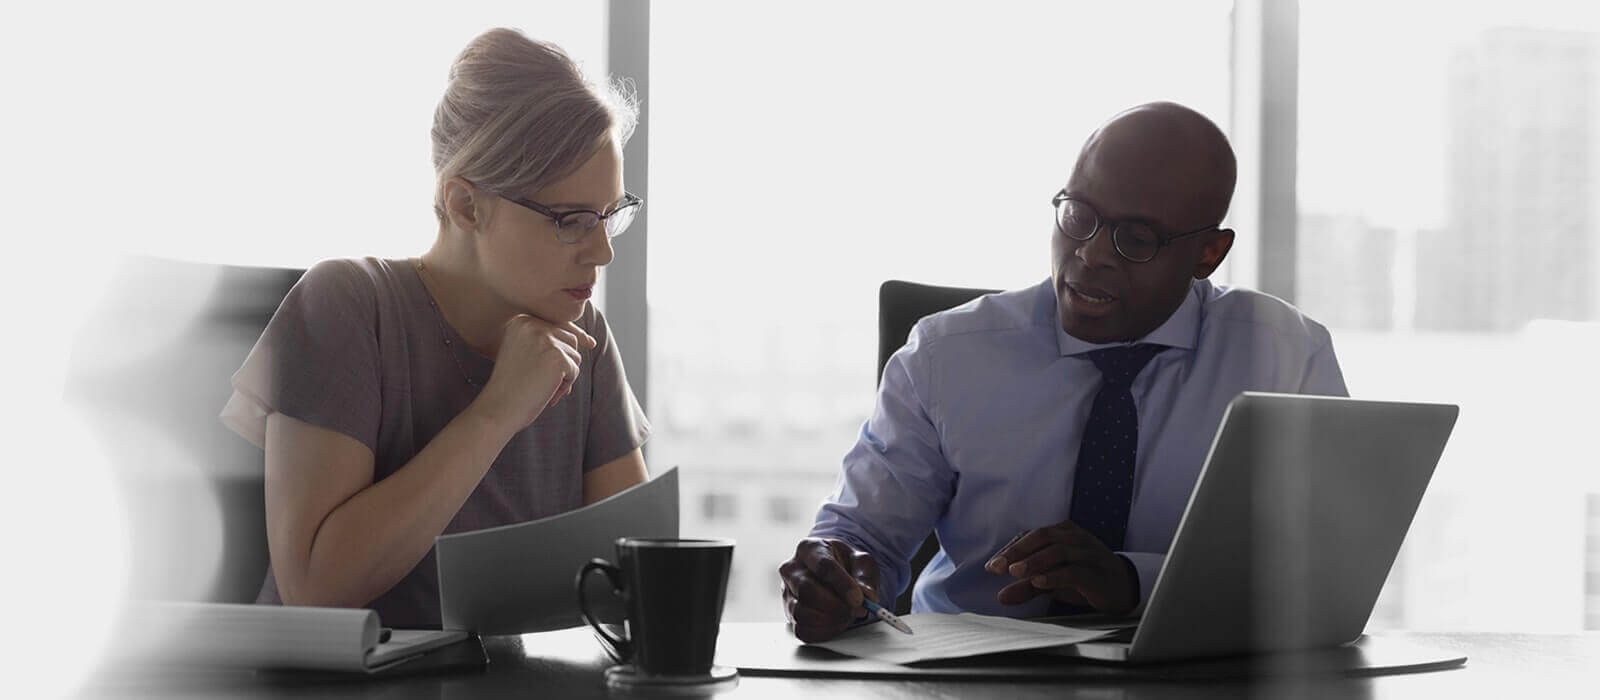 A man and woman discussing financial documents at a desk.